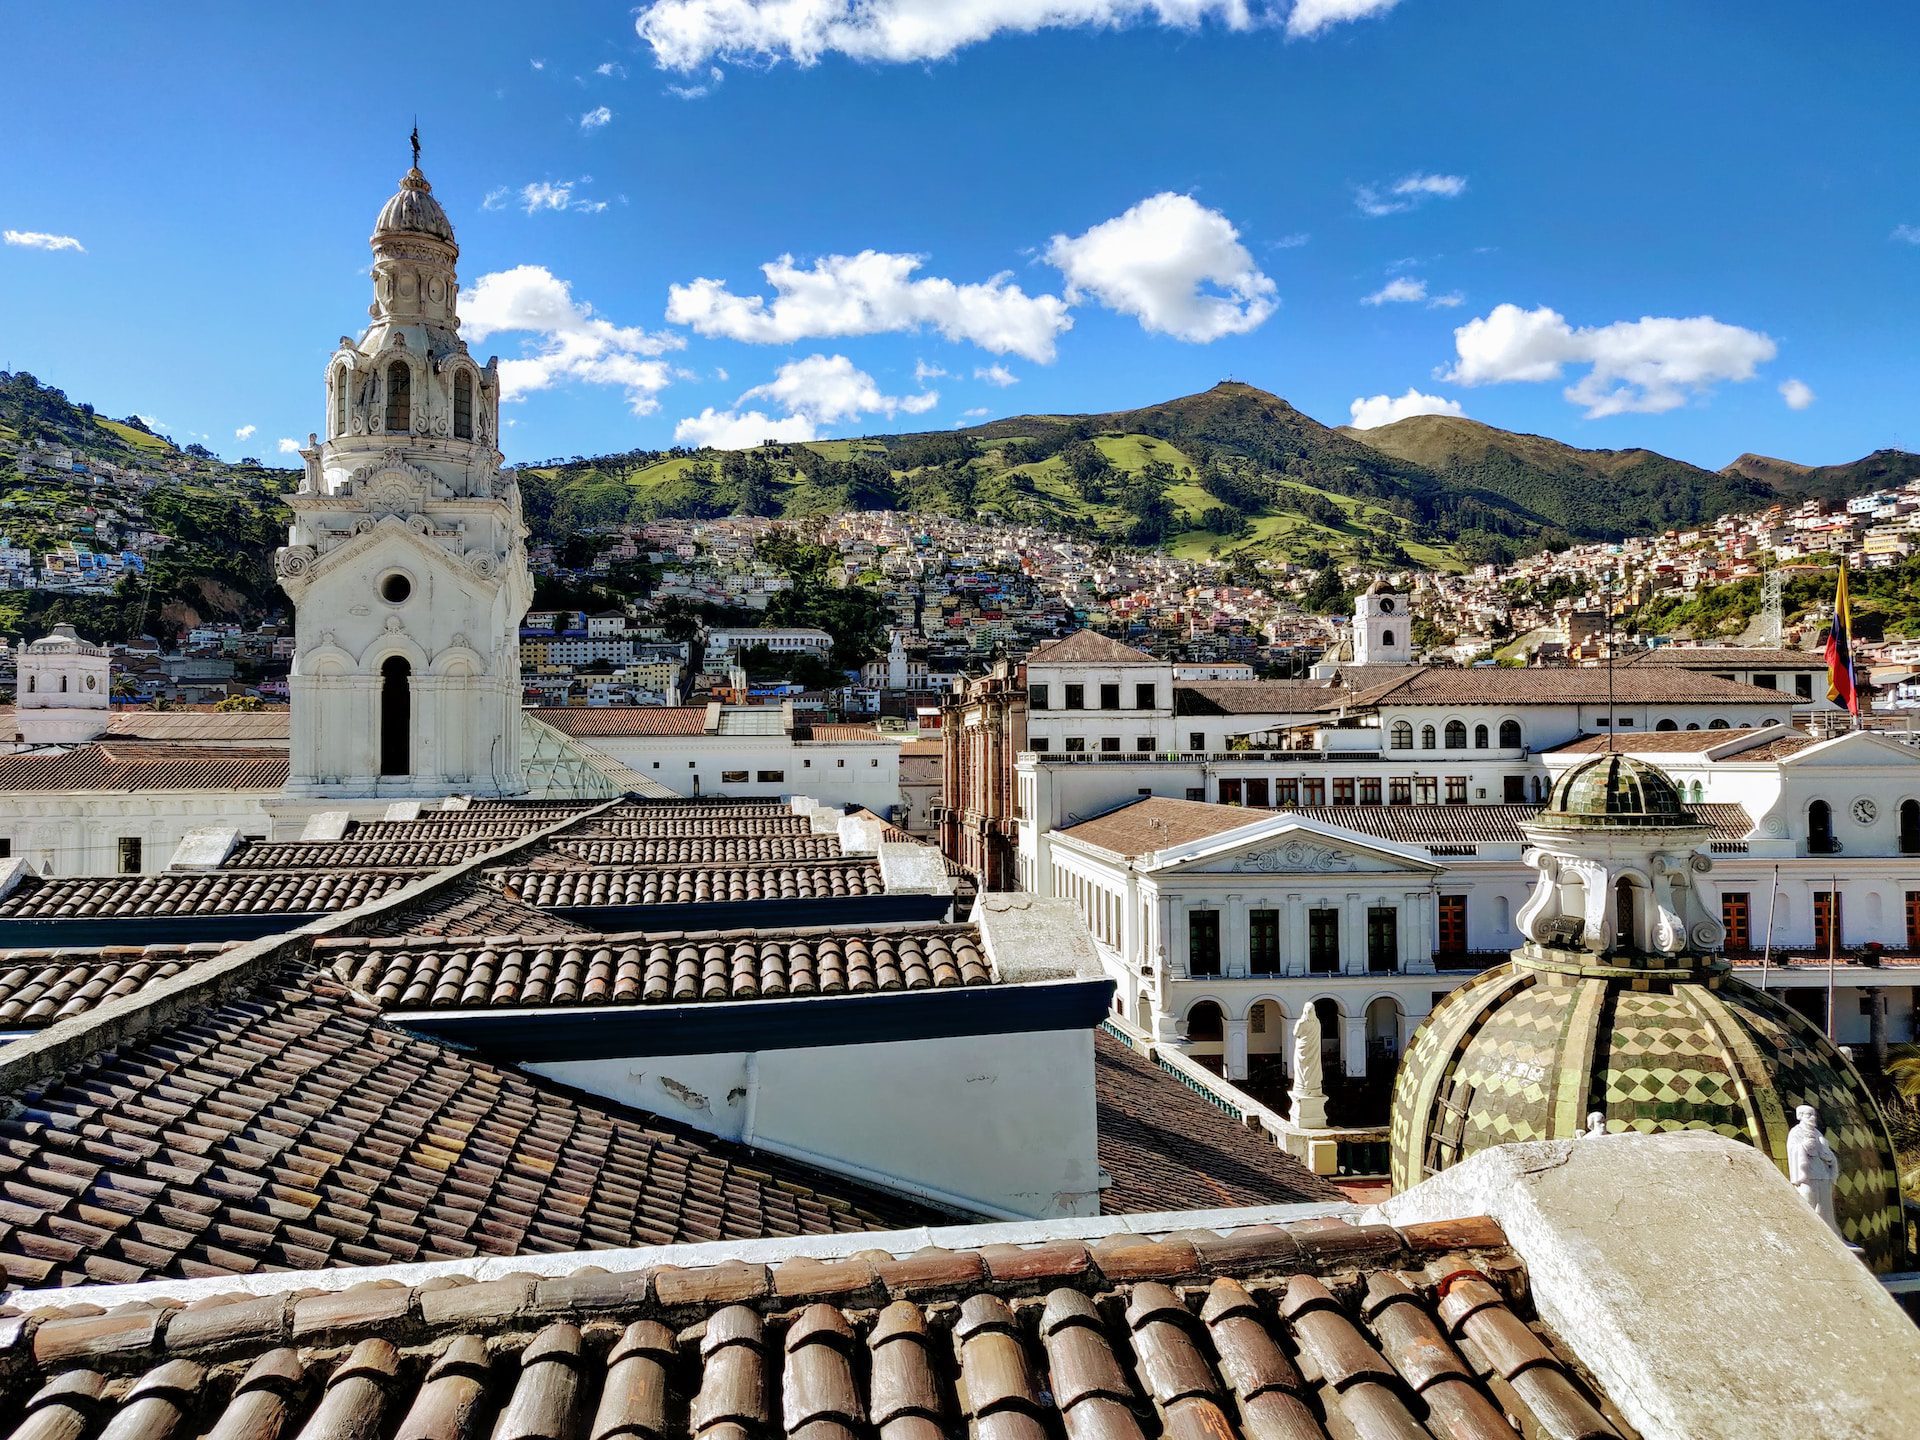 A view of the rooftops in the Old Town with a church tower and green hills in the background.